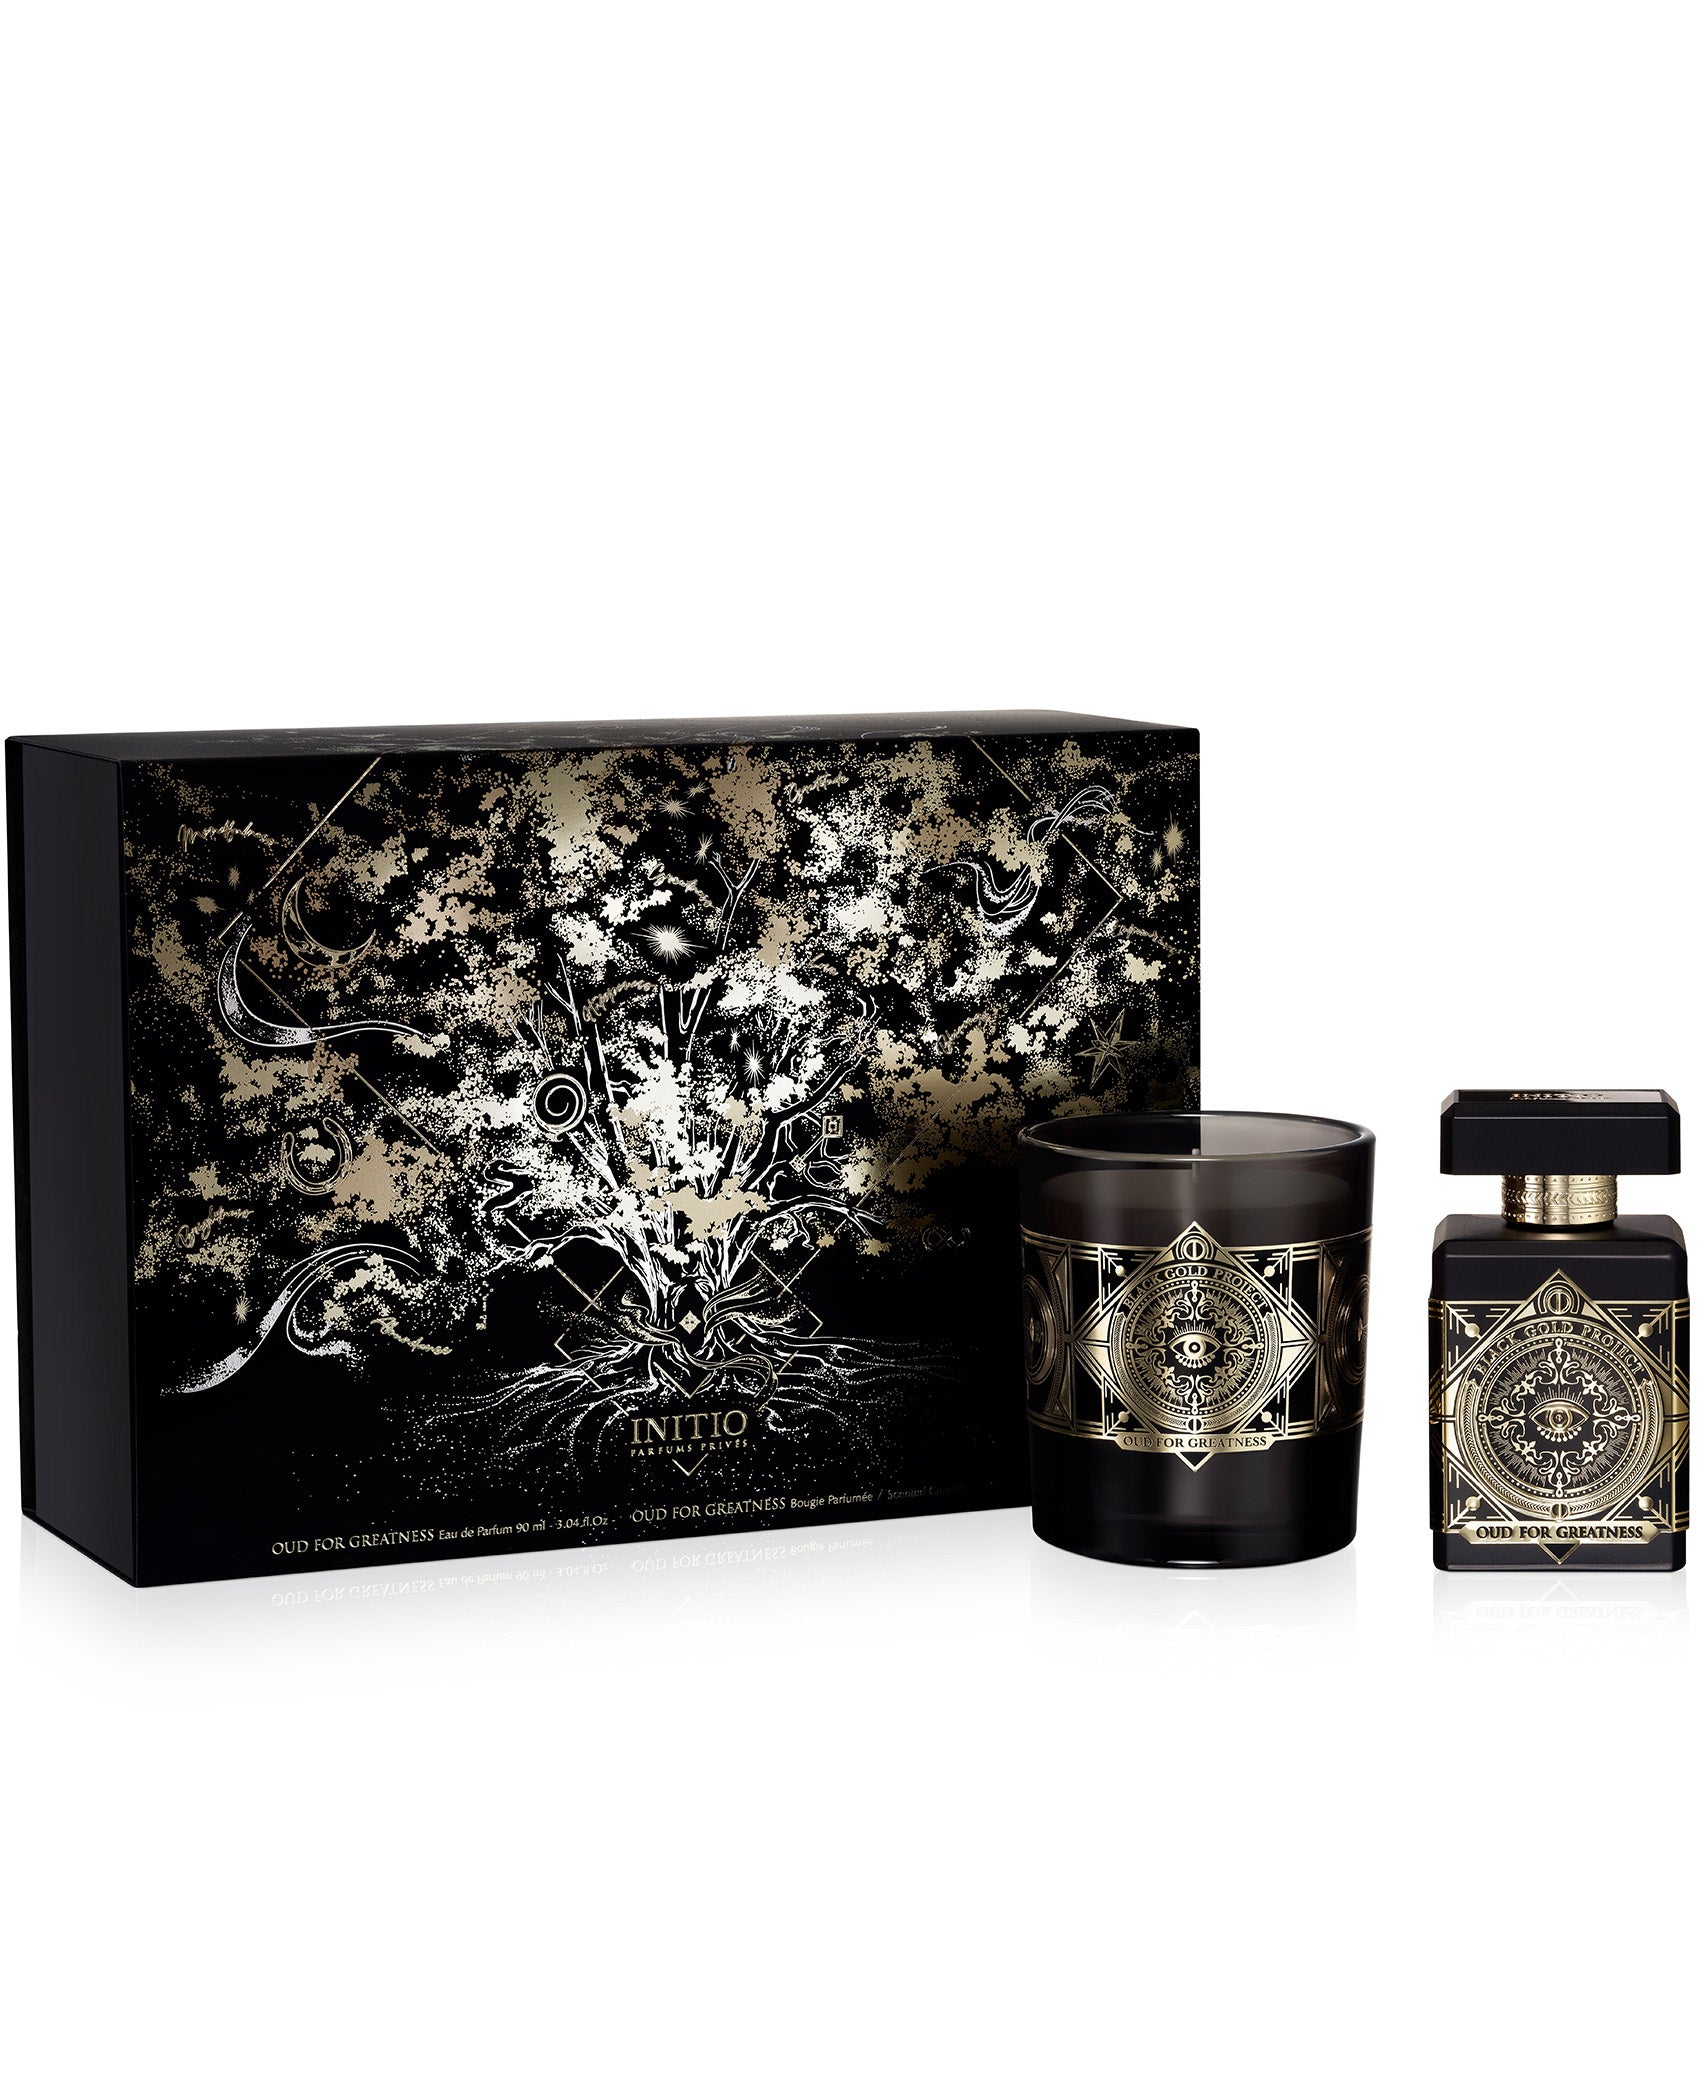 OUD FOR GREATNESS LIMITED EDITION US Privés CANDLE SET INITIO – Parfums